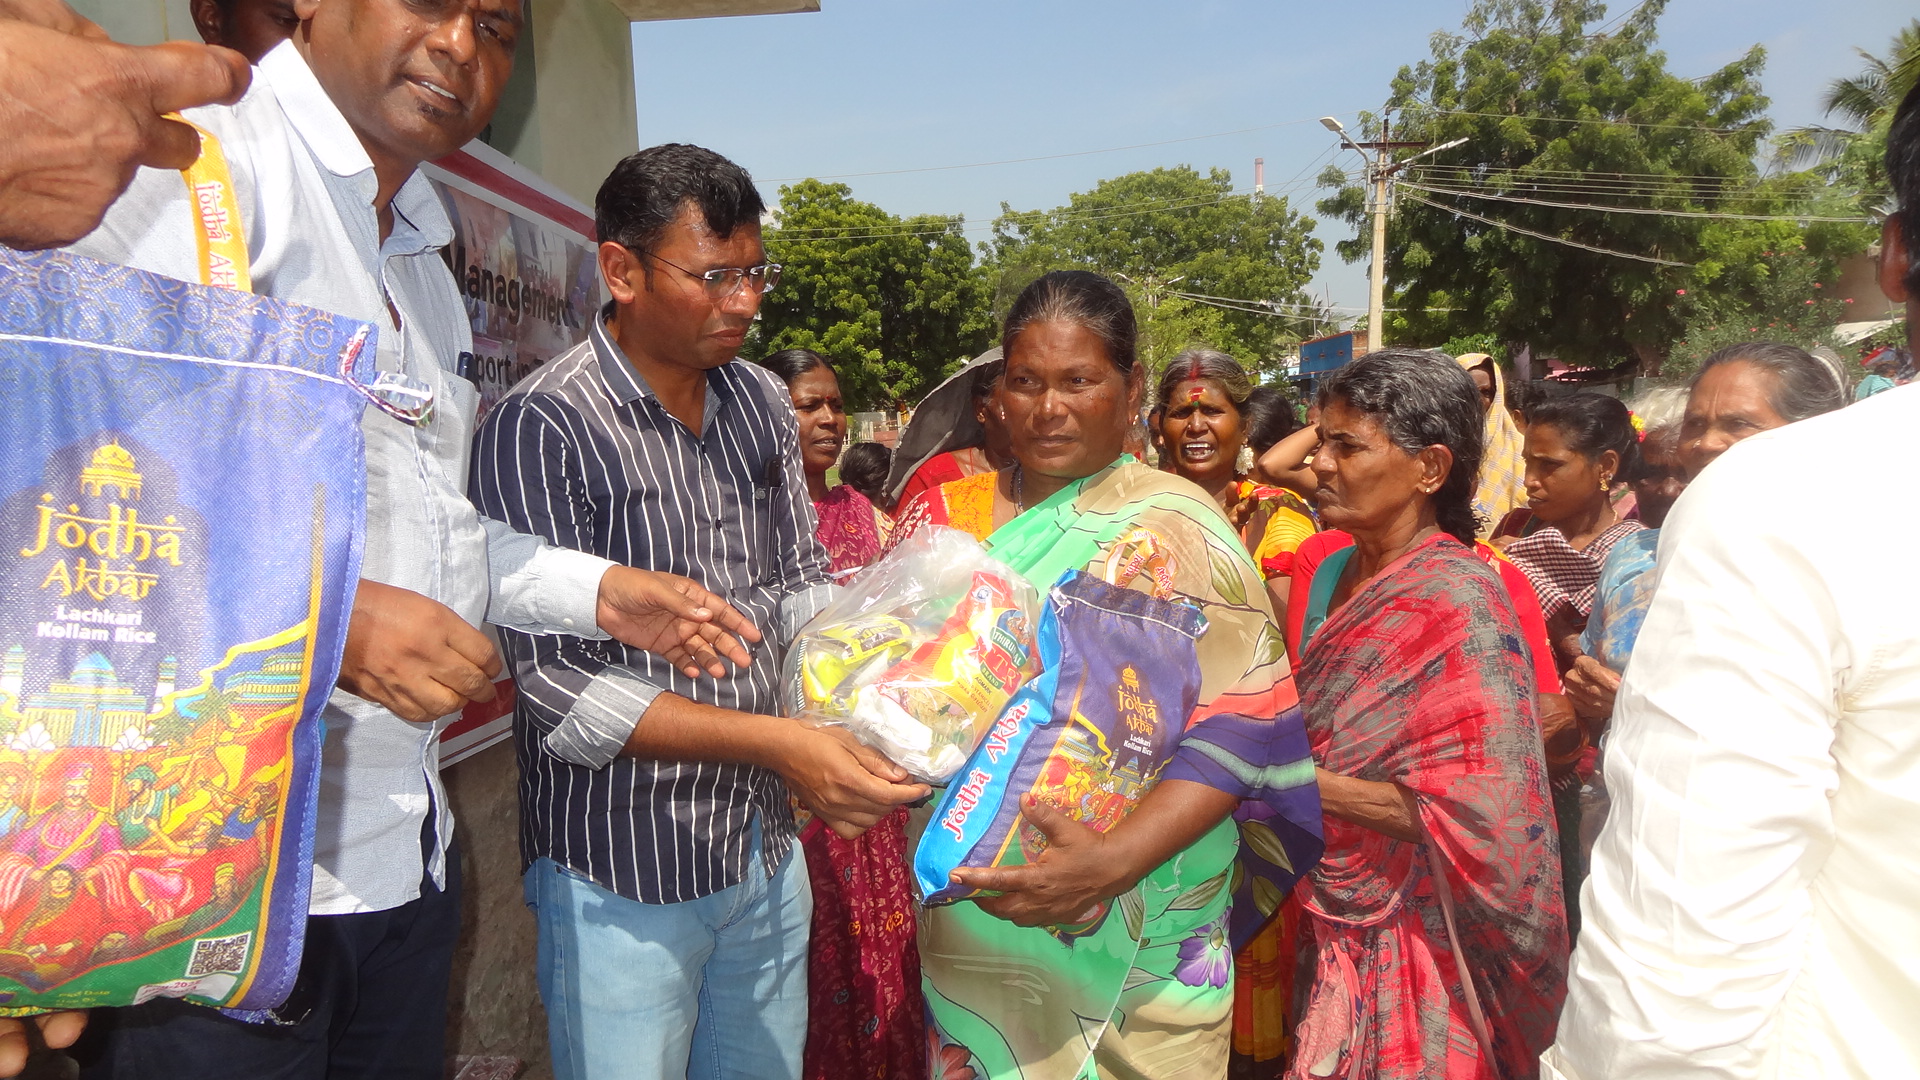 UNITY IN CRISIS: RELIEF EFFORTS DURING TUTICORIN’S SEVERE FLOODS